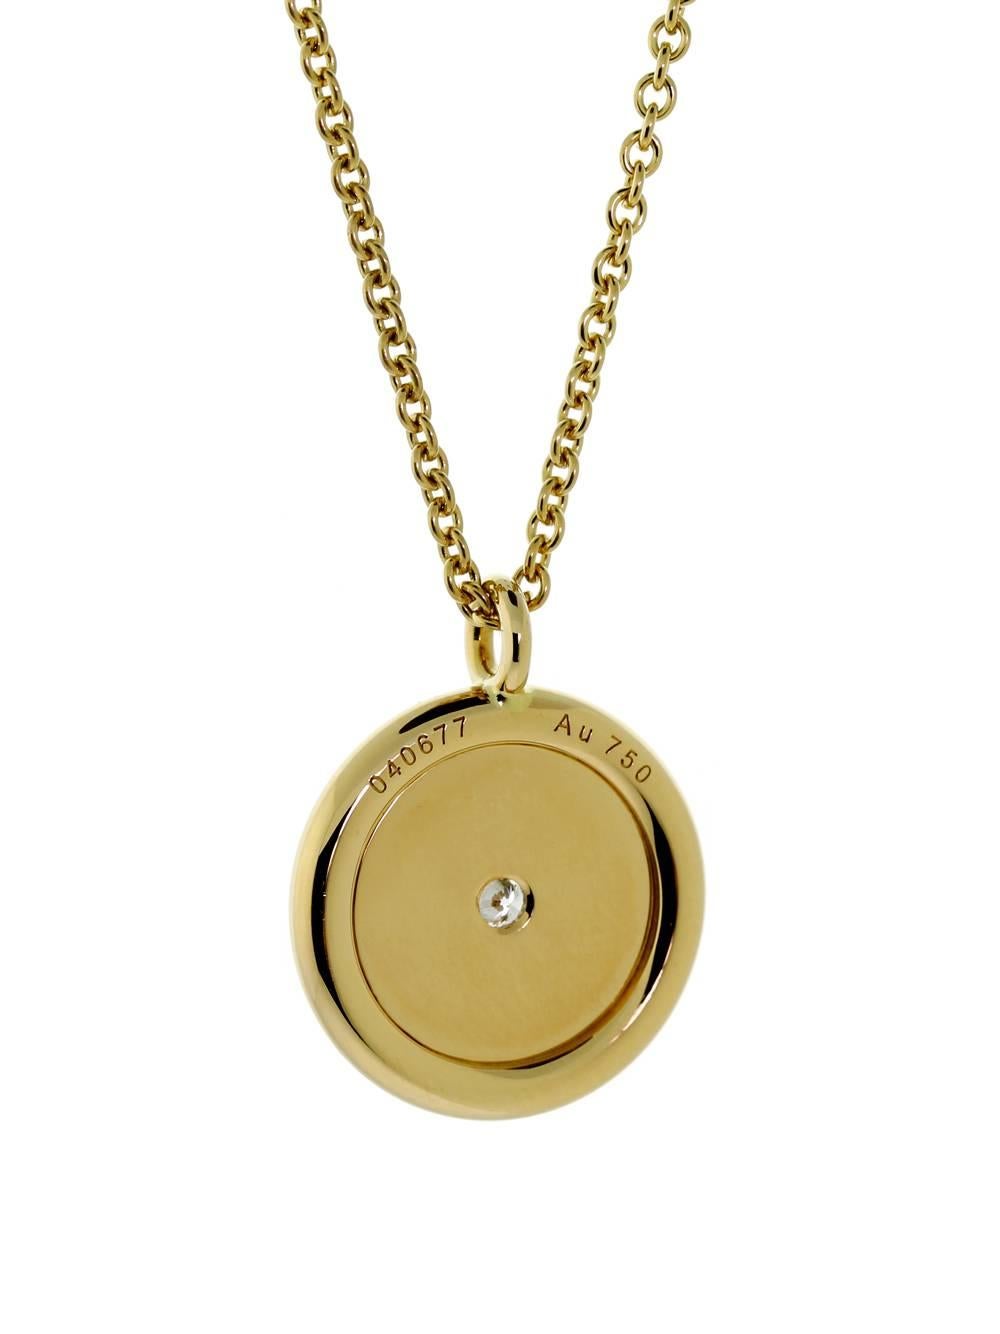 A fabulous Hermes necklace from the Clous De Selle collection featuring rich yellow gold adorned by a round brilliant cut diamond, and a raised polished border. The perfect necklace for everyday wear!

Made of 18k Yellow Gold
Hallmarks: French